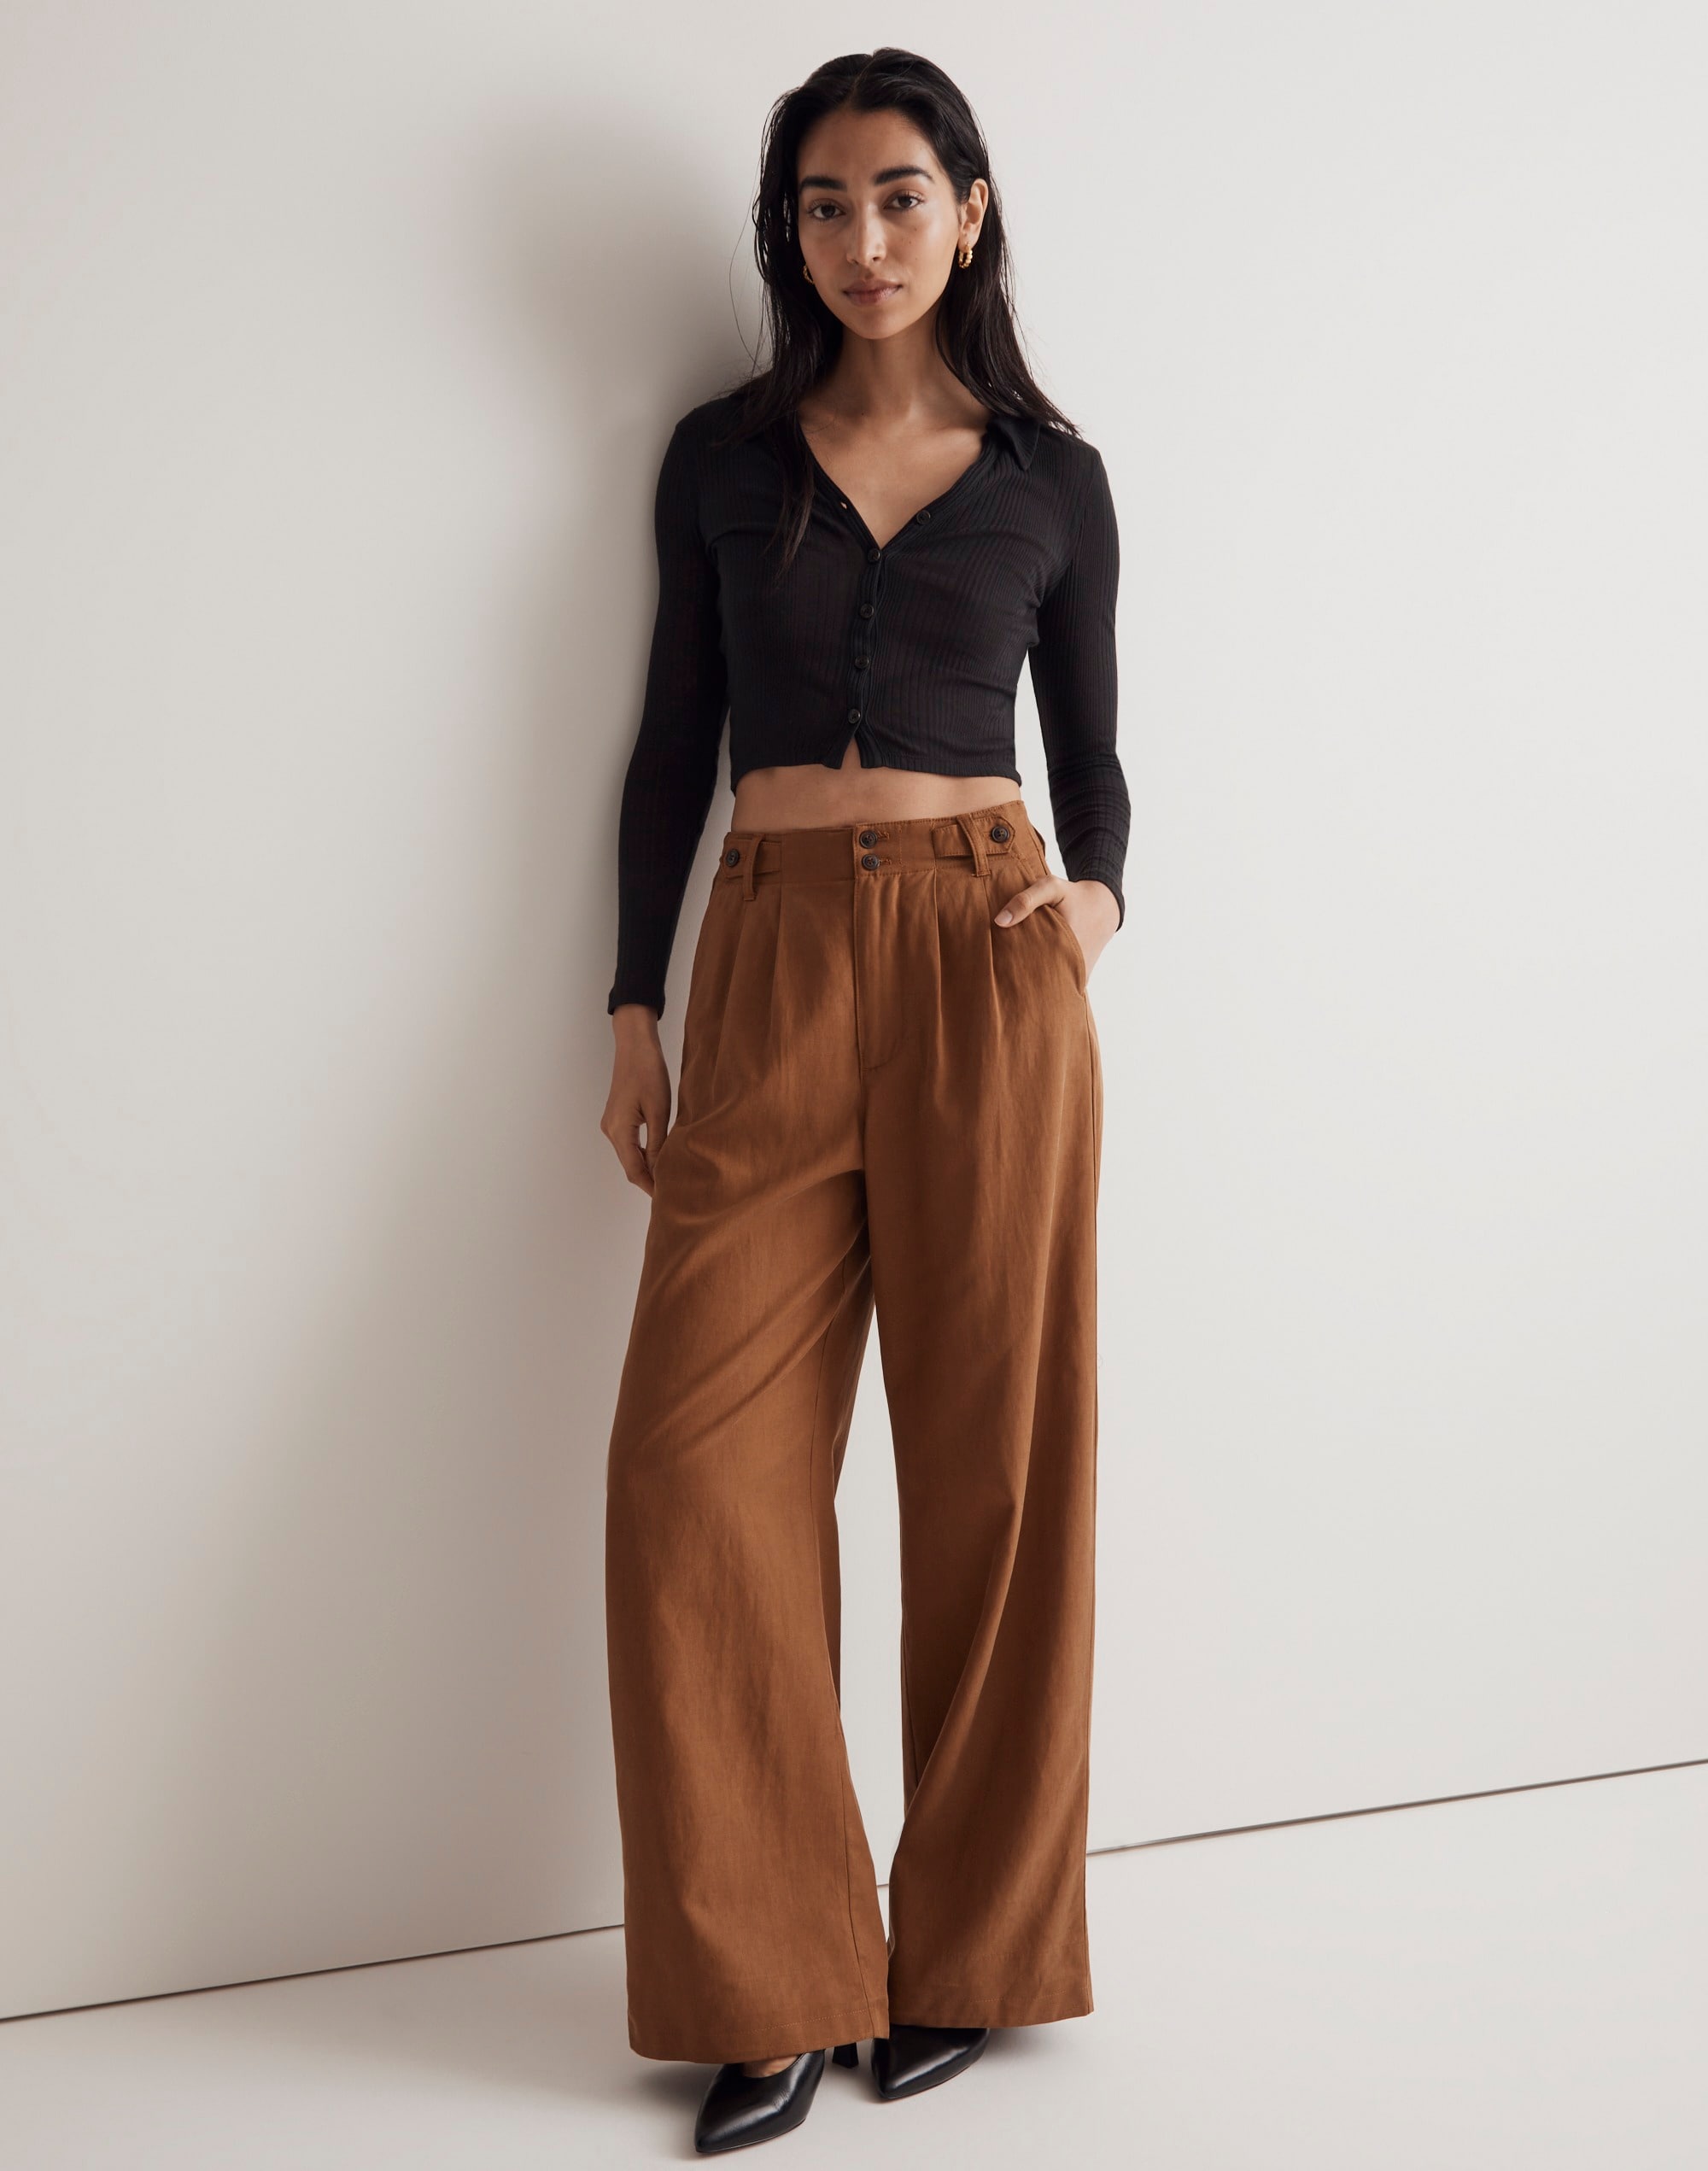 https://www.madewell.com/images/NG521_BR5188_m